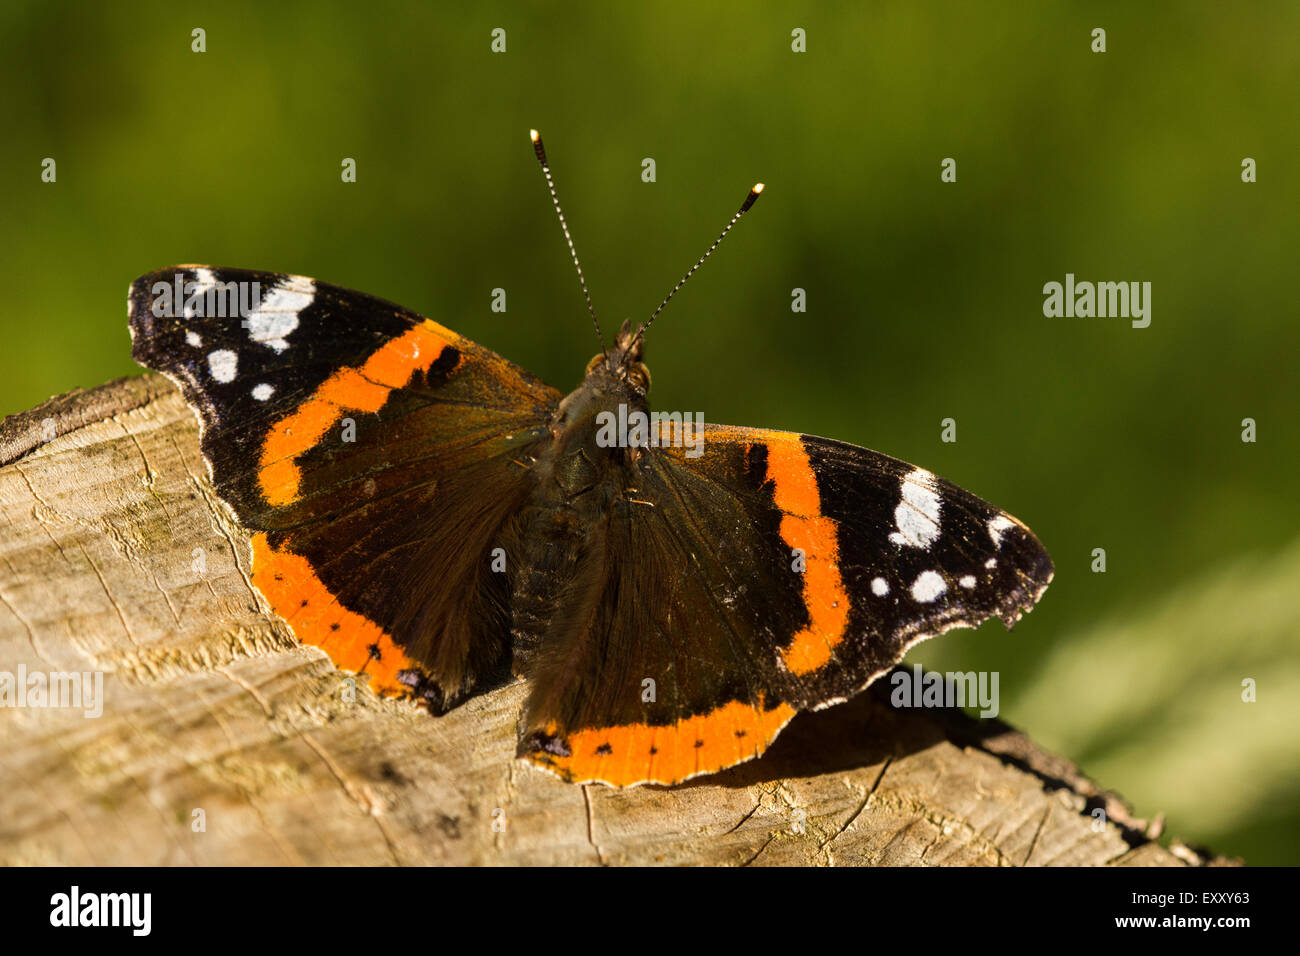 Butterfly resting on a sawn off tree stump. Stock Photo